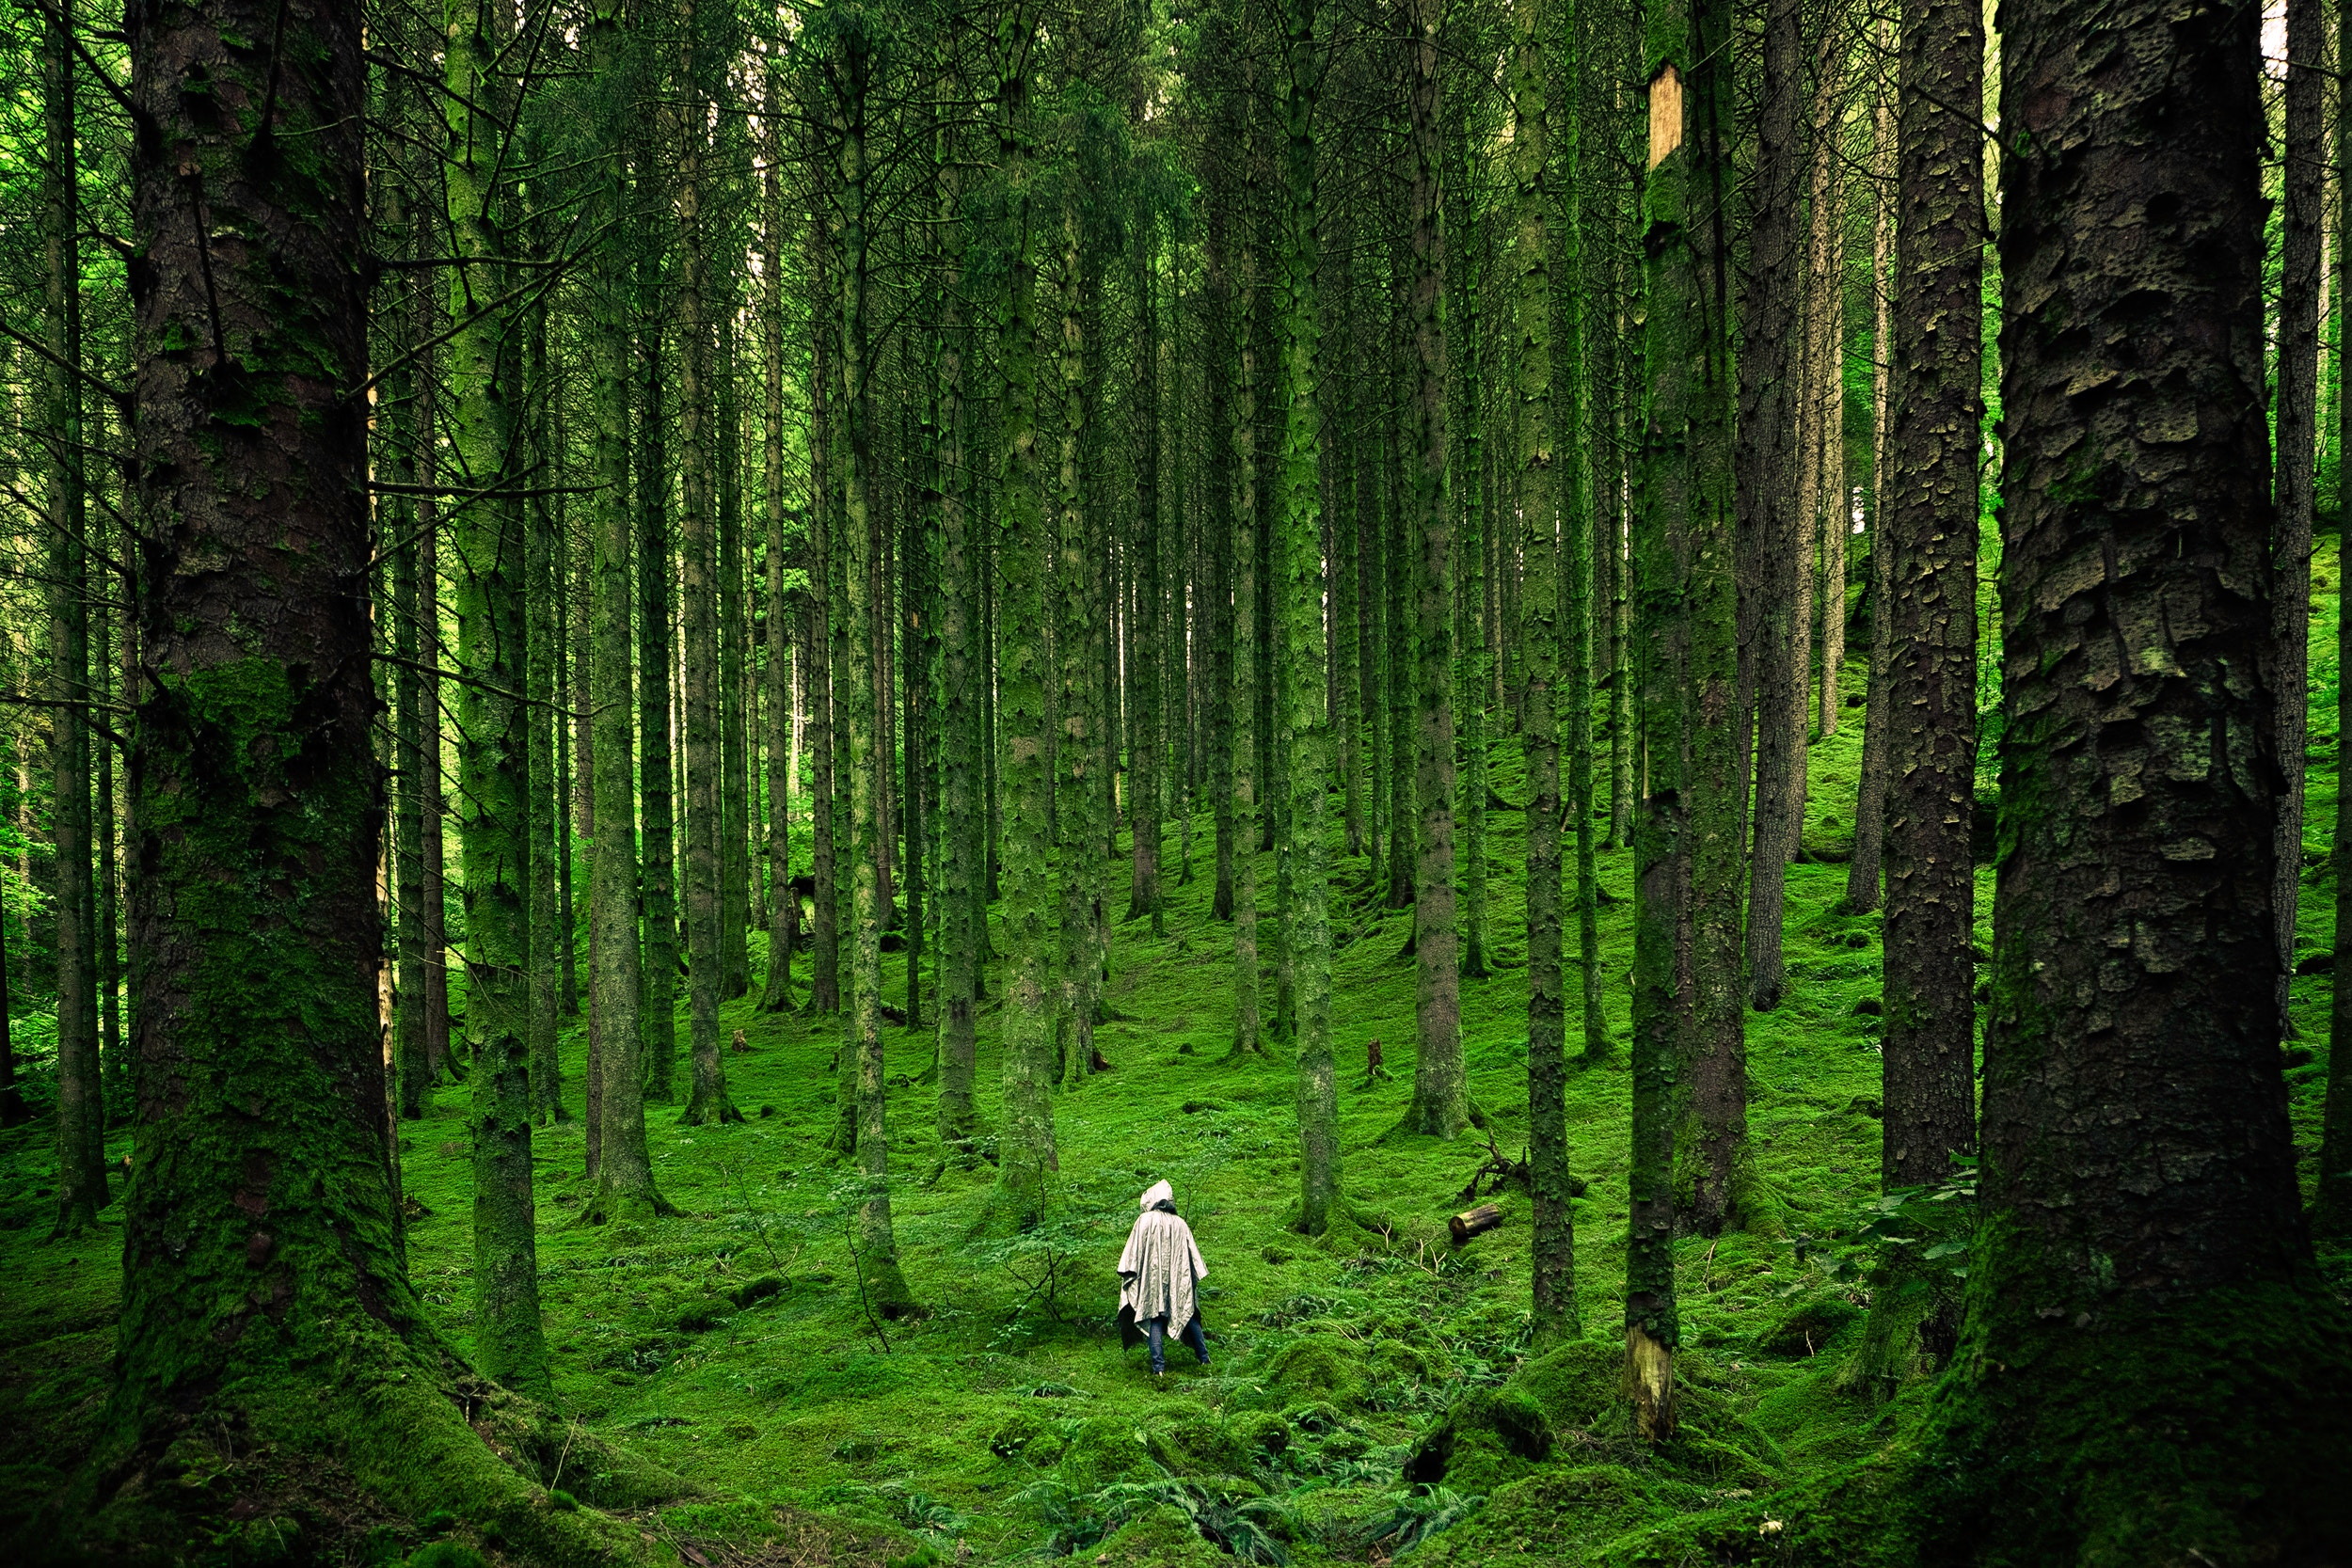 wanderer, person, journey, human, trees, nature, forest, mantle